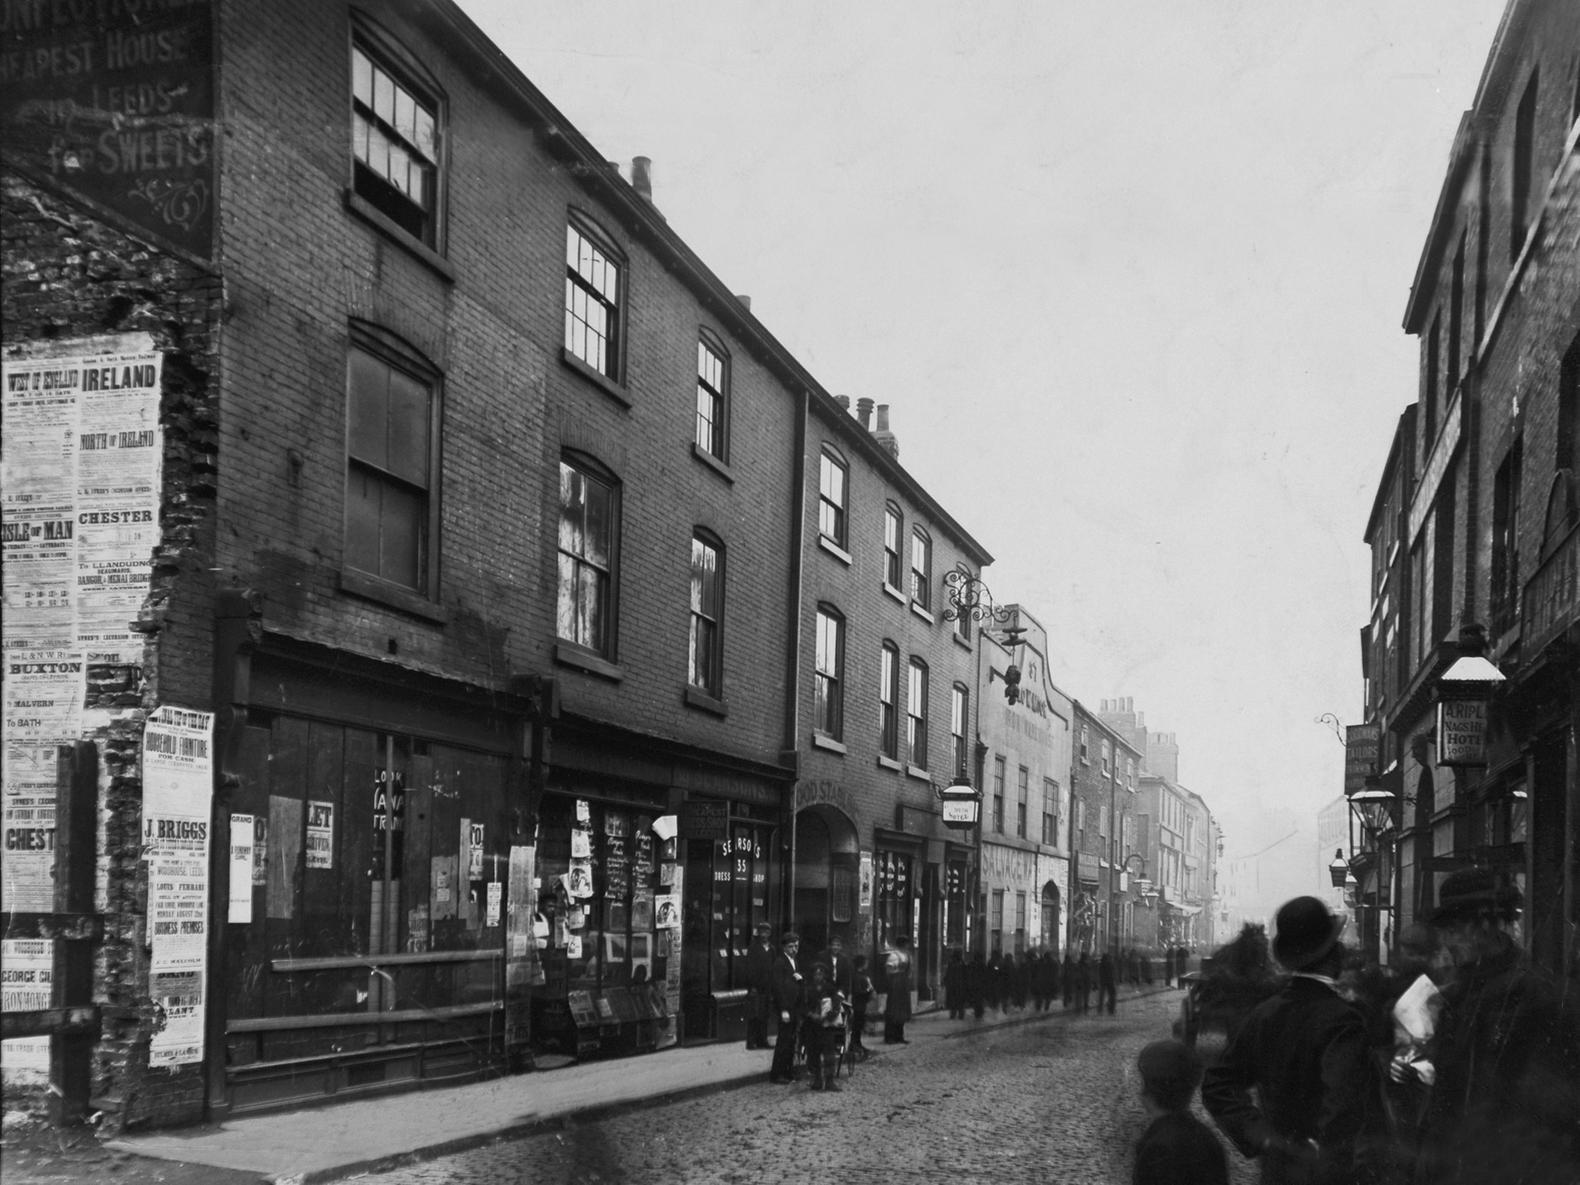 Vicar Lane when it was a much narrower cobbled thoroughfare. The Nag's Head Hotel sign can be seen on the right.